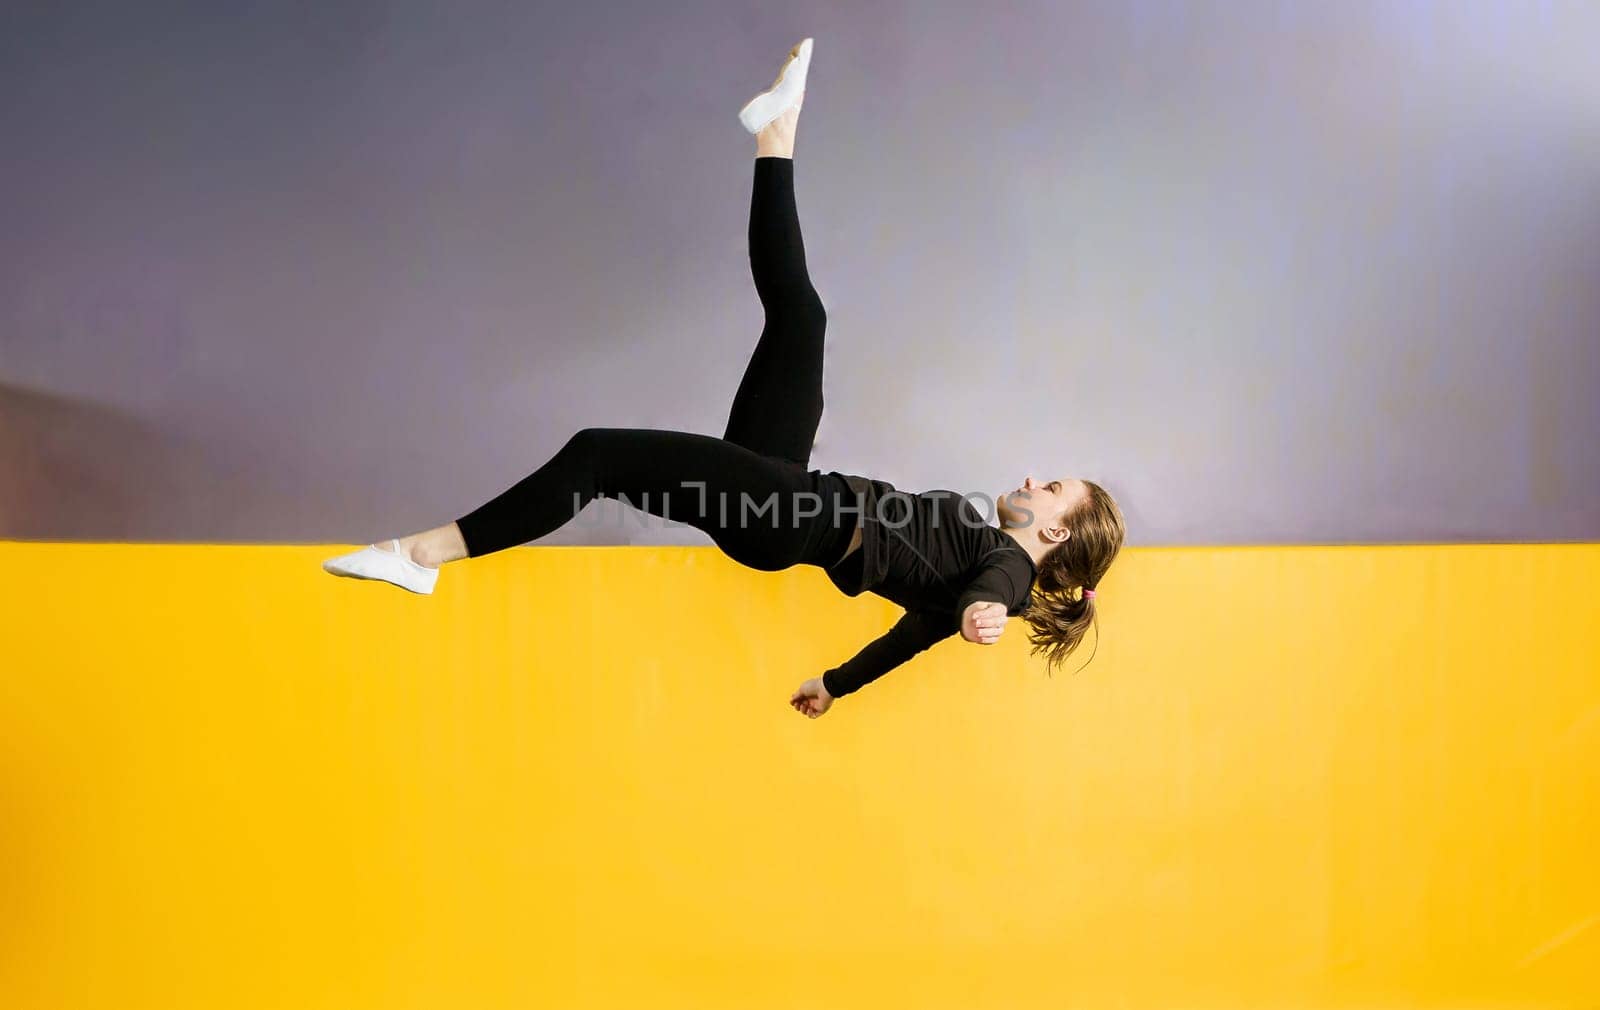 Young woman amateur acrobatic athlete jumping and exercising on a trampoline indoors, modern hobby and fitness concept by Mariakray